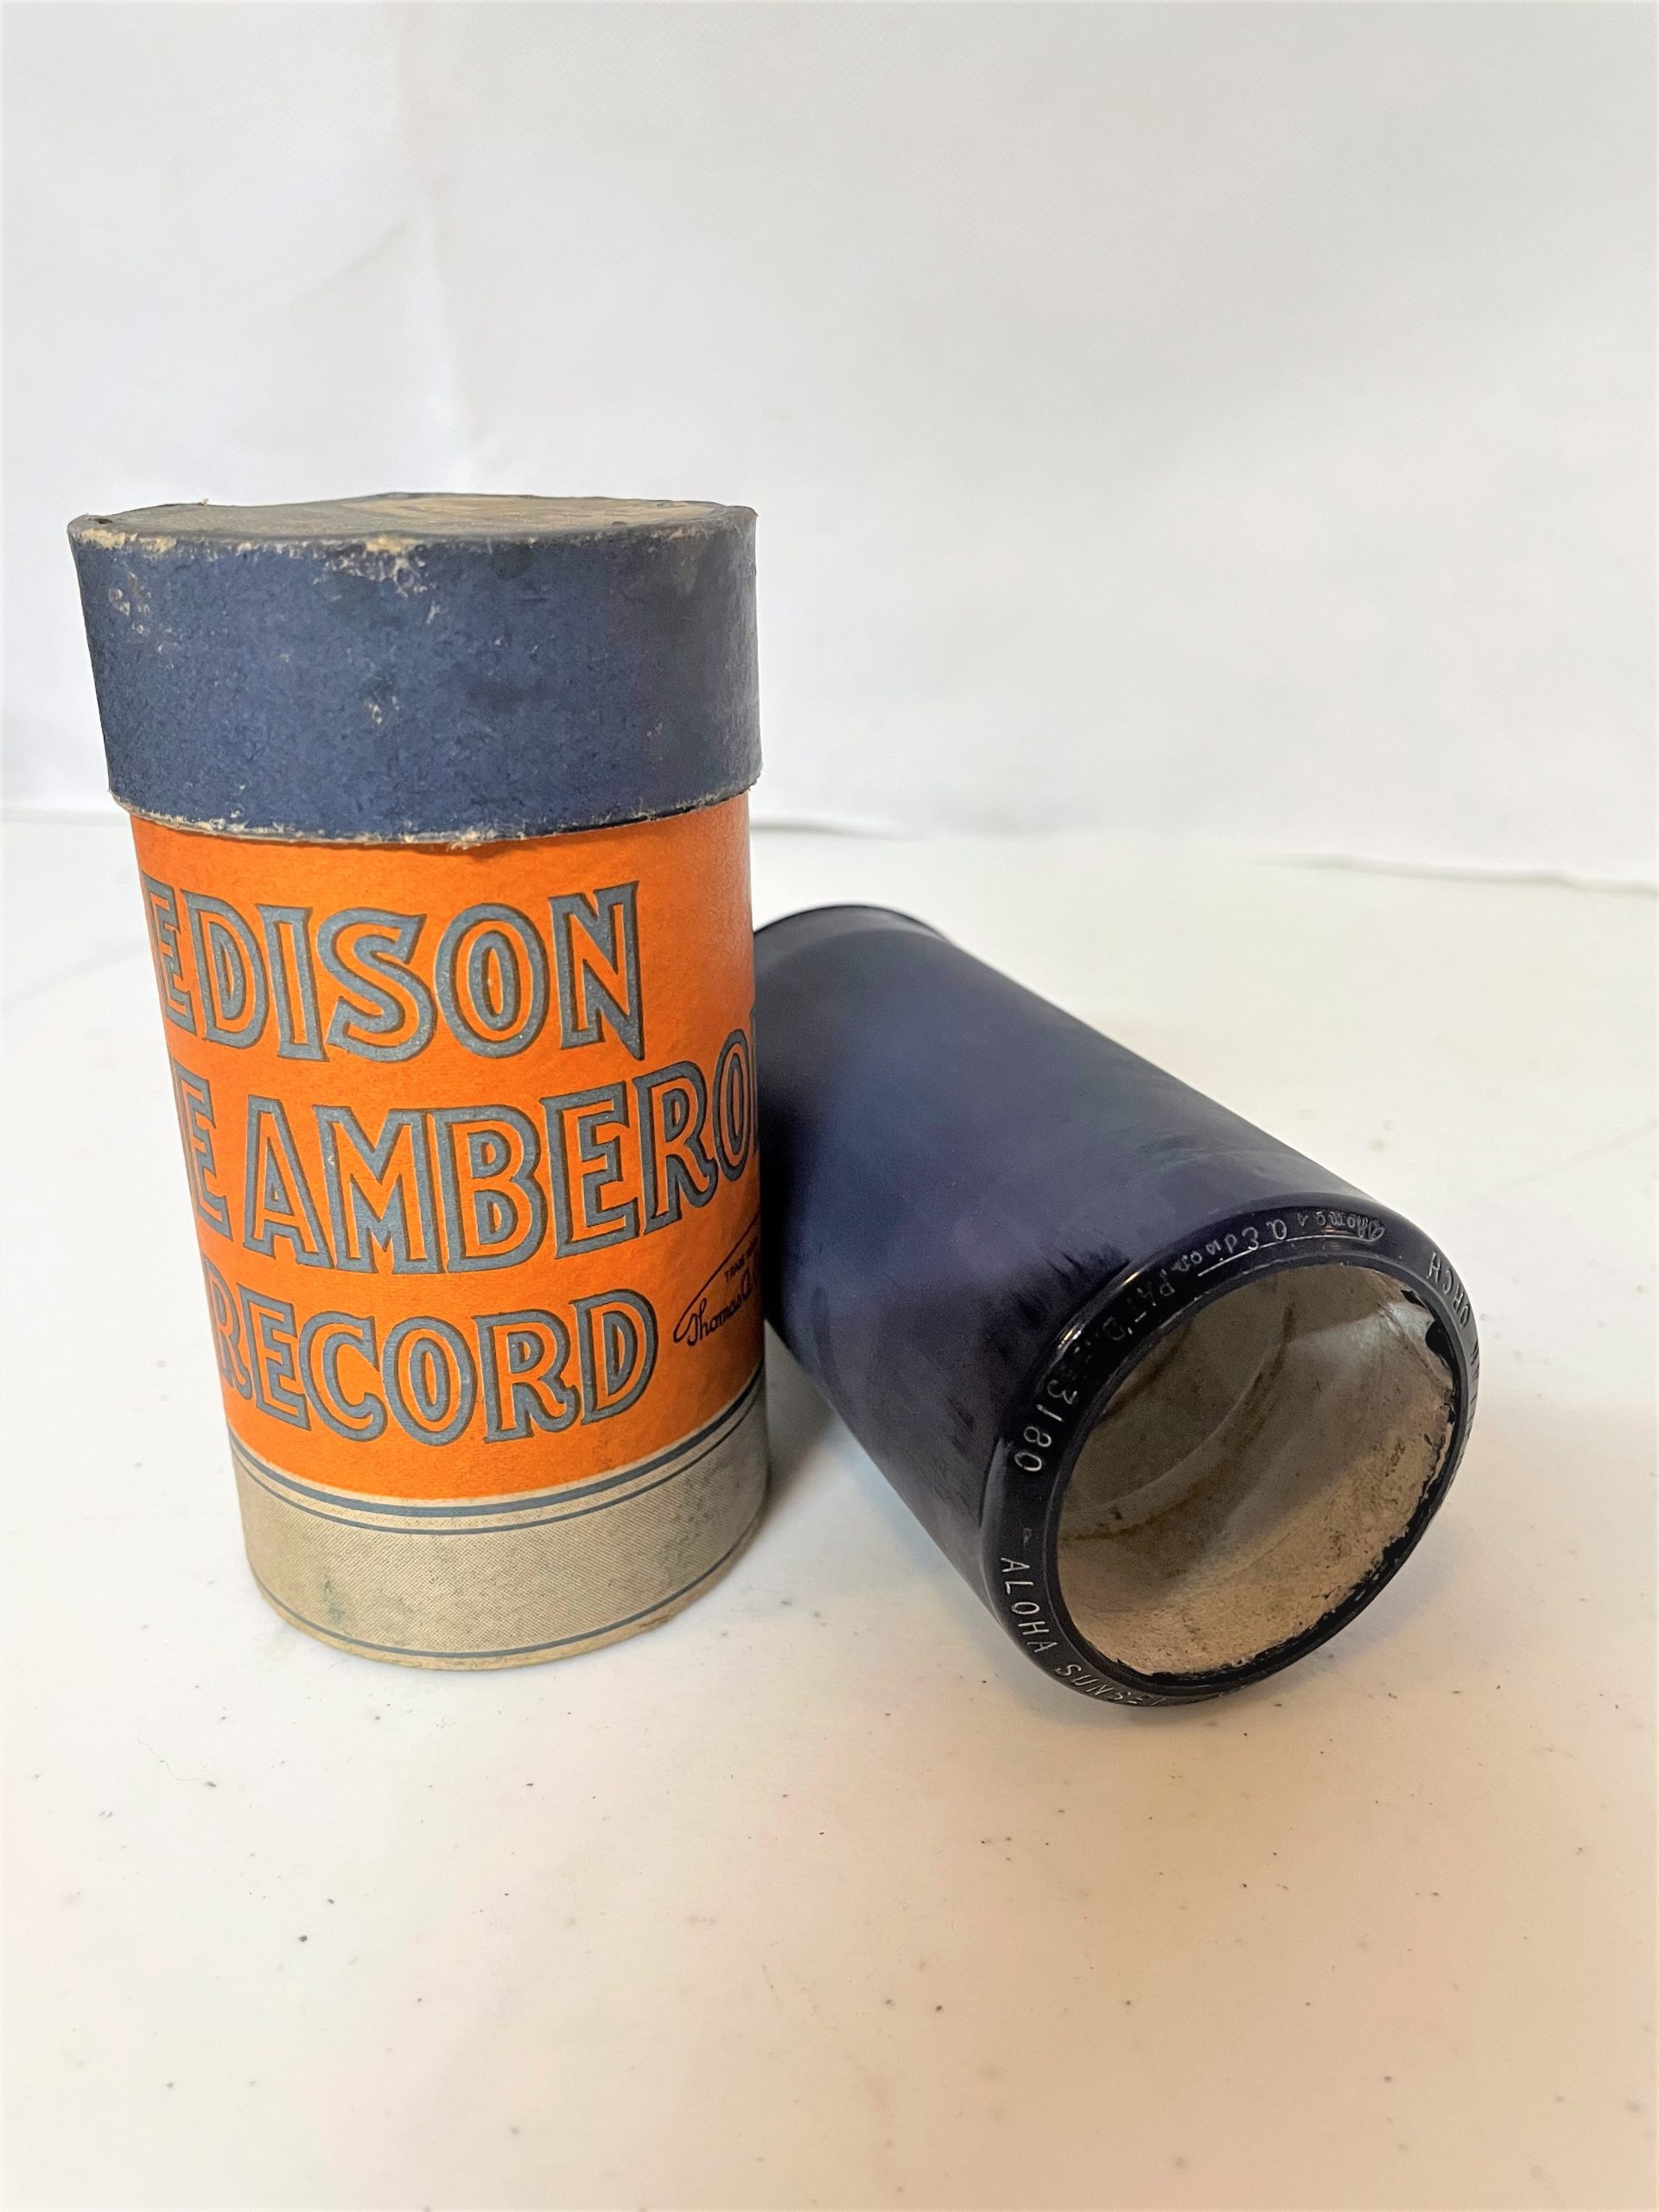 Edison 4 minute cylinder… “Over There”… Great song about the “Great War or known as WWI”